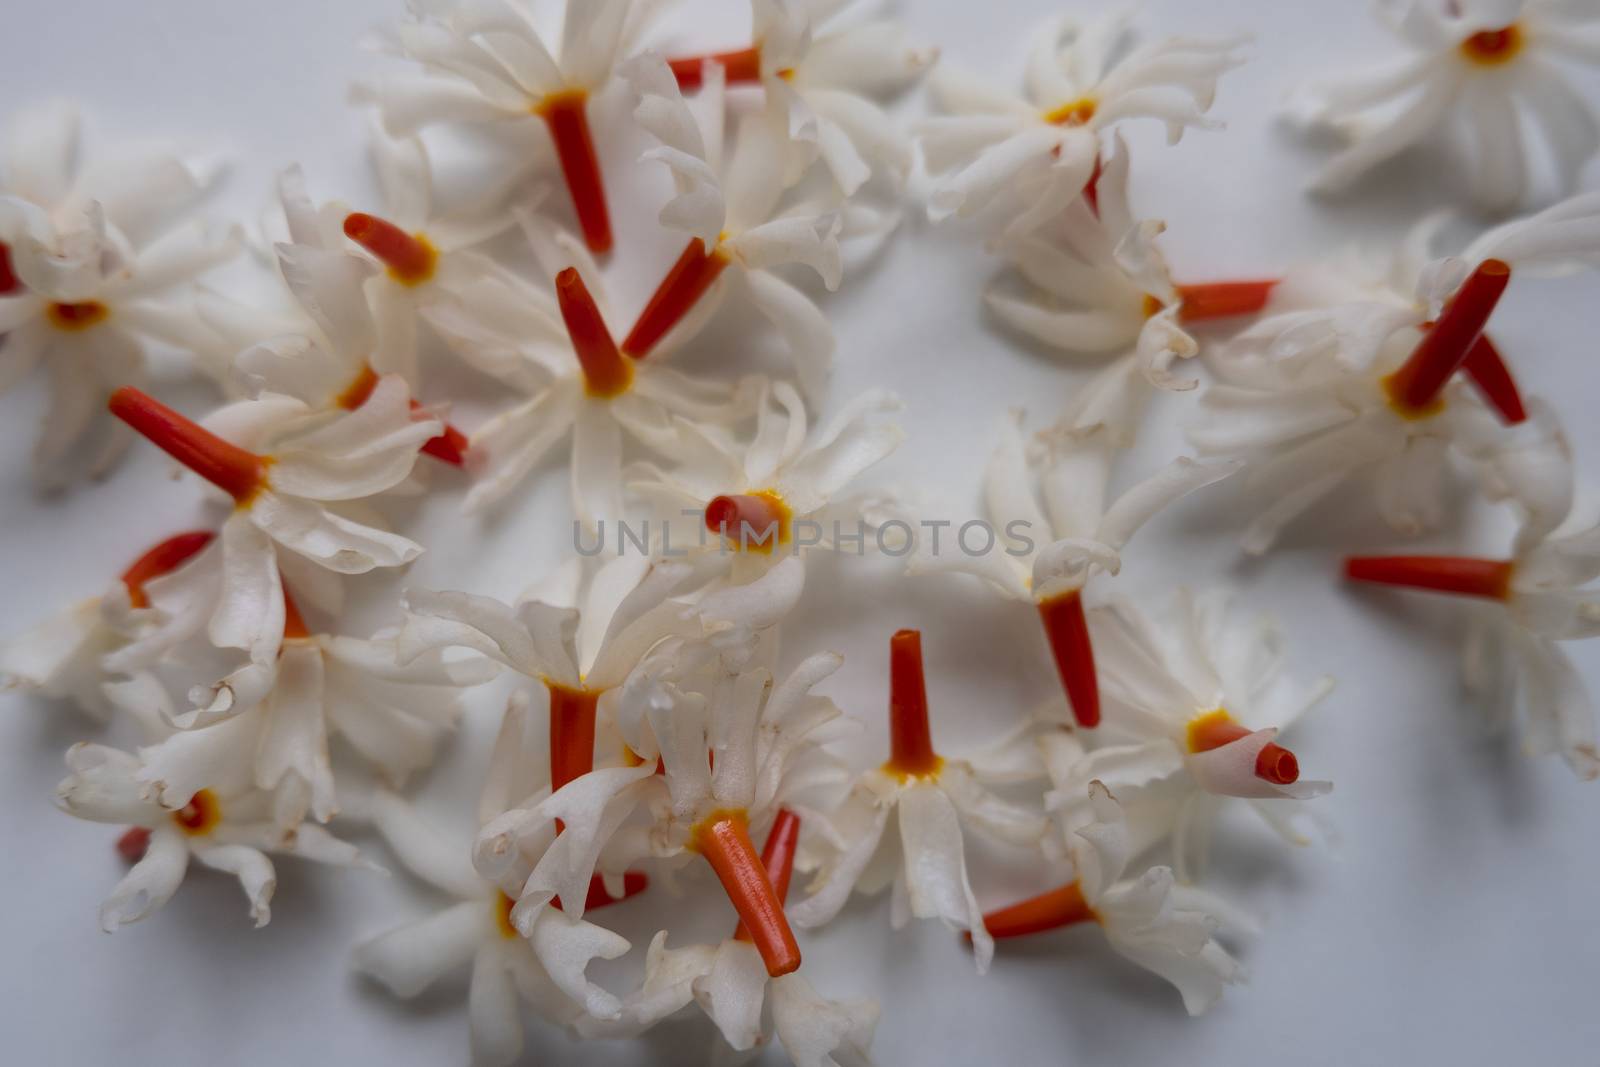 Night Jasmine (Parijat) flower gathering on white background its called Raat Ki Rani In India. The amazing fragrance of this flower uses in many spiritual activities